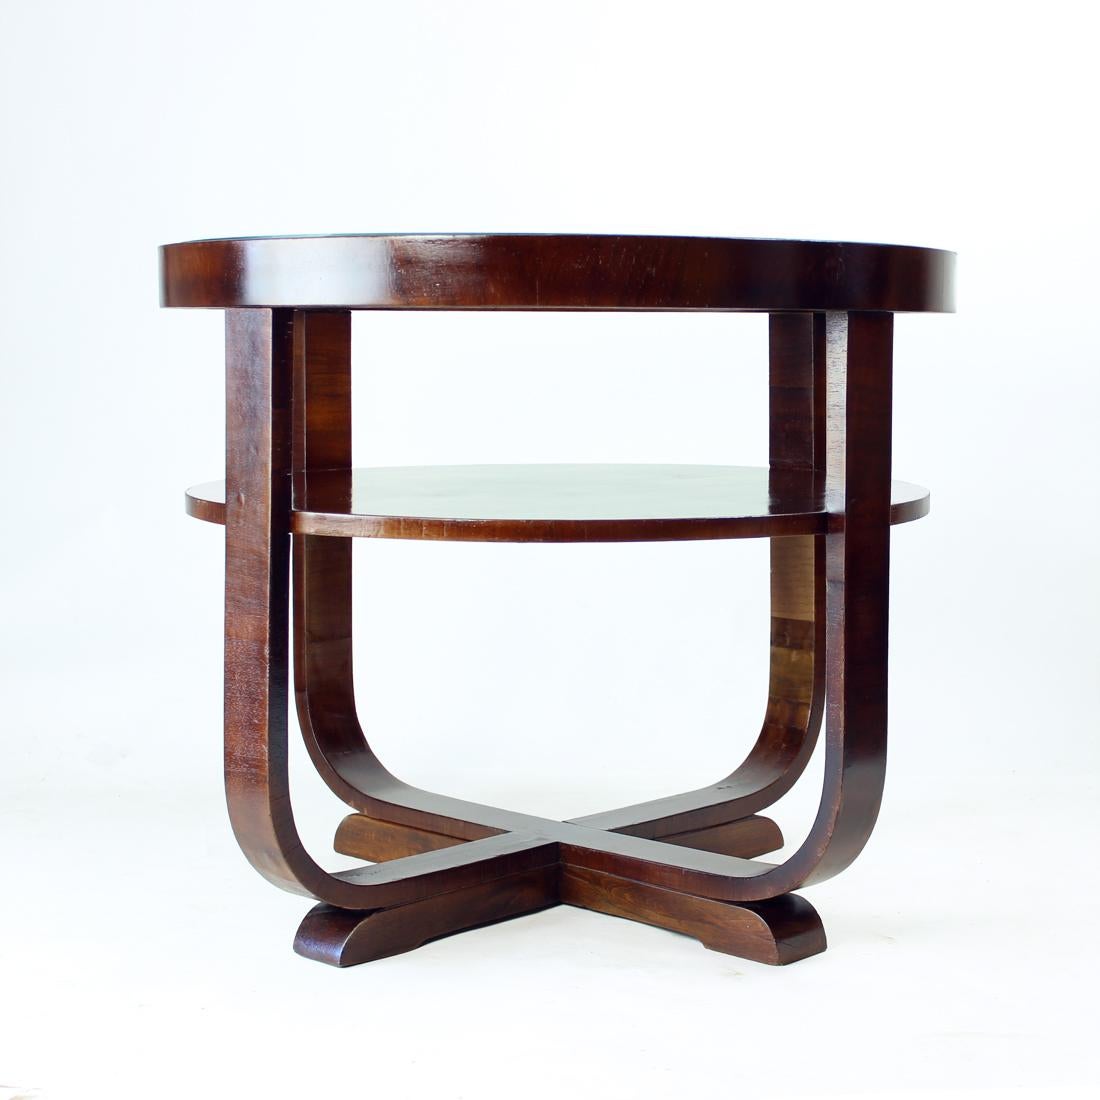 Beautiful and completely restored large art deco coffee table (or side table). Produced in Czechoslovakia in 1930s. The table is trully unique in style and construction. It is round and made of bent oak wood with walnut veneer and finished with a